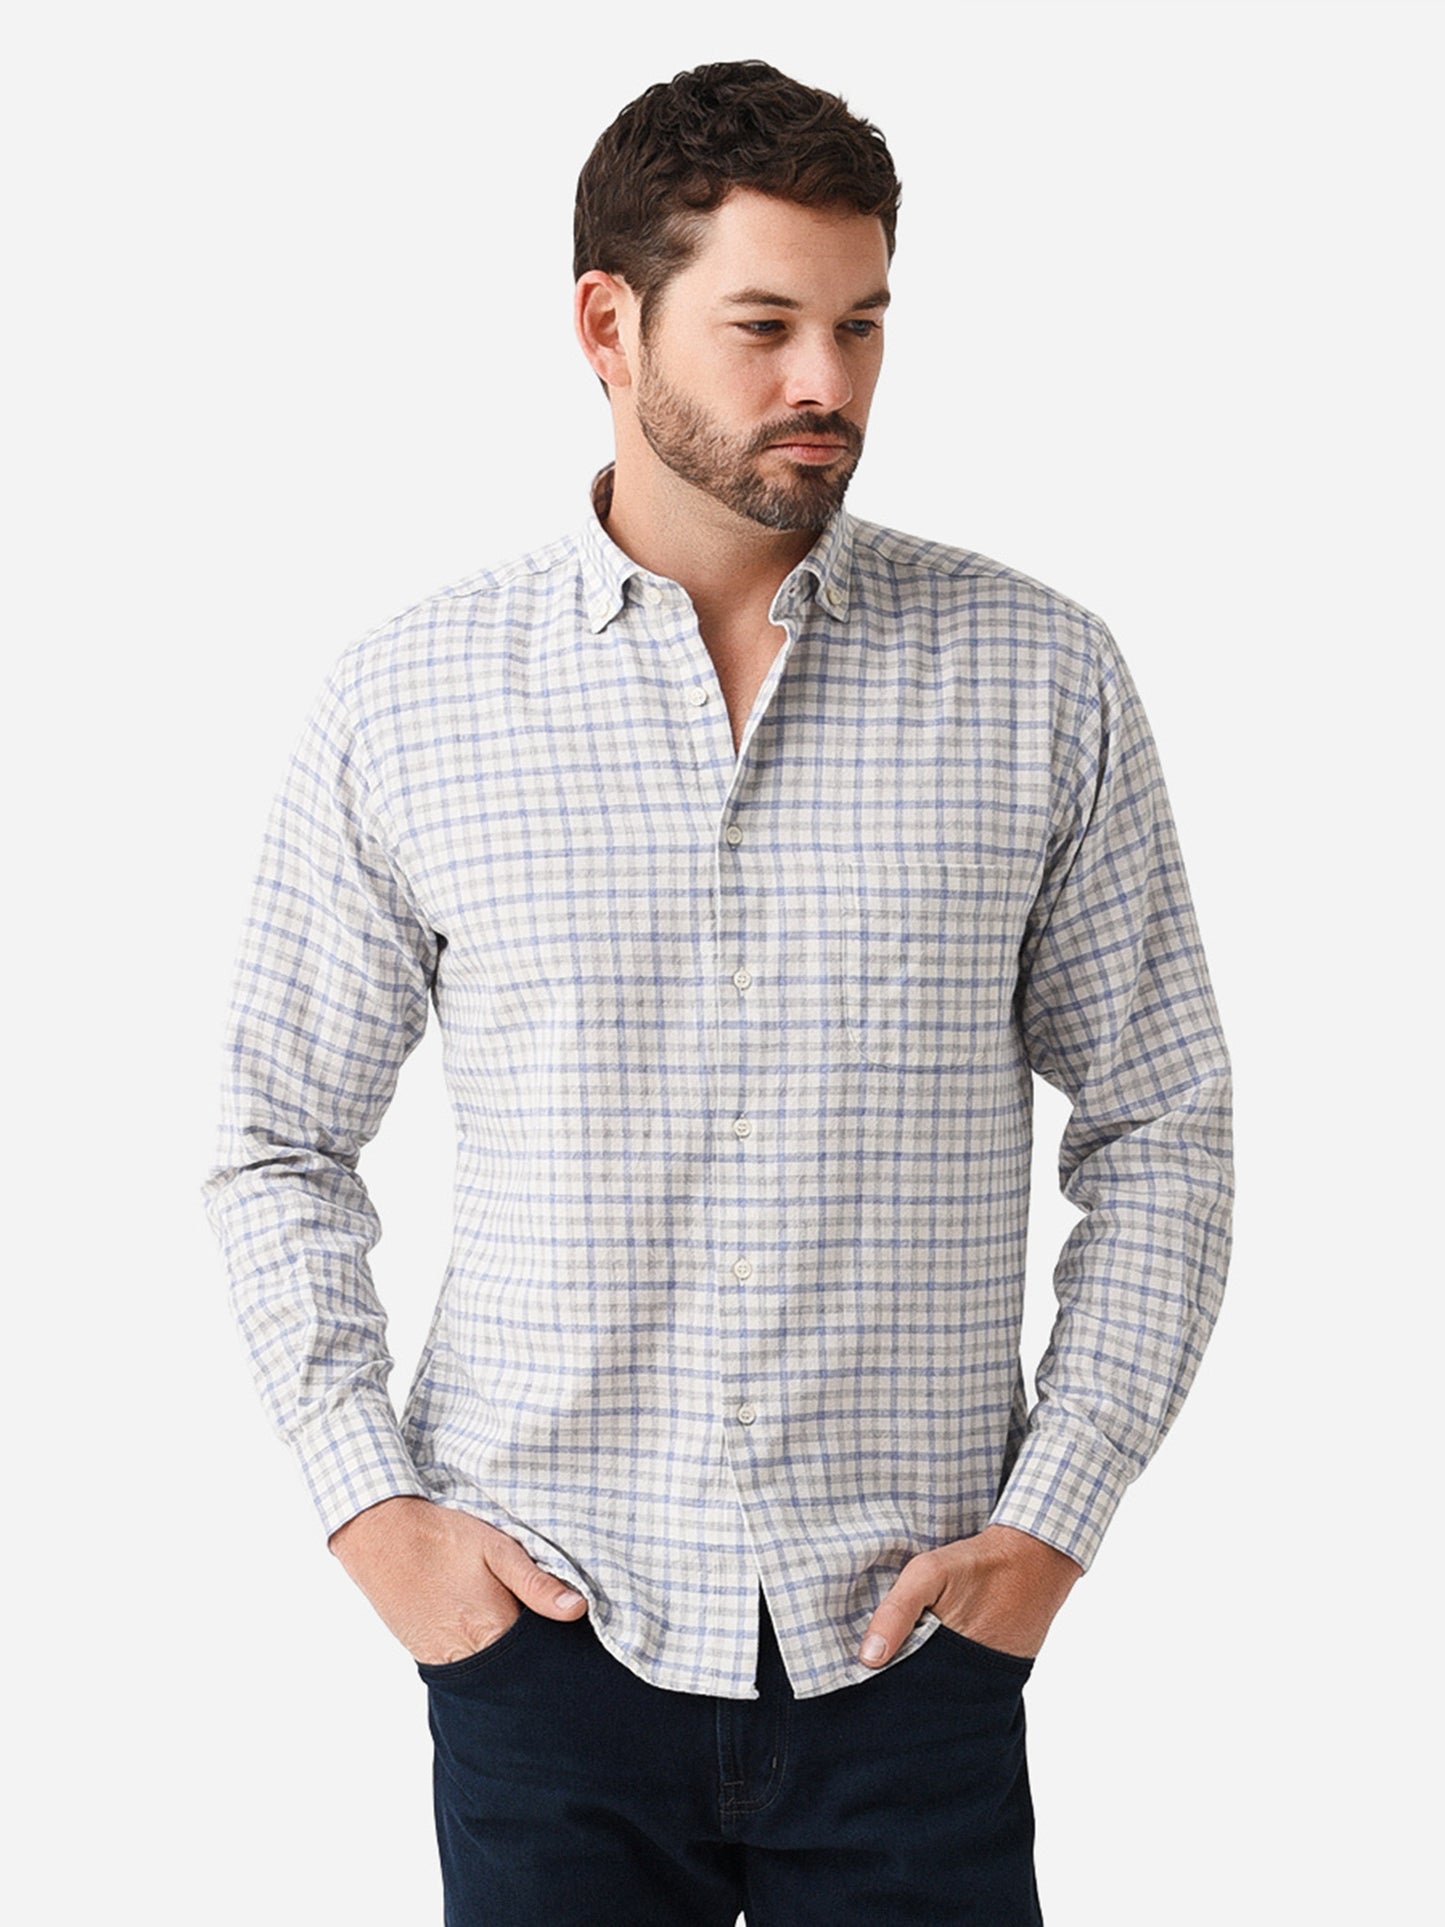 Miller Westby Men's Victor Button-Down Shirt